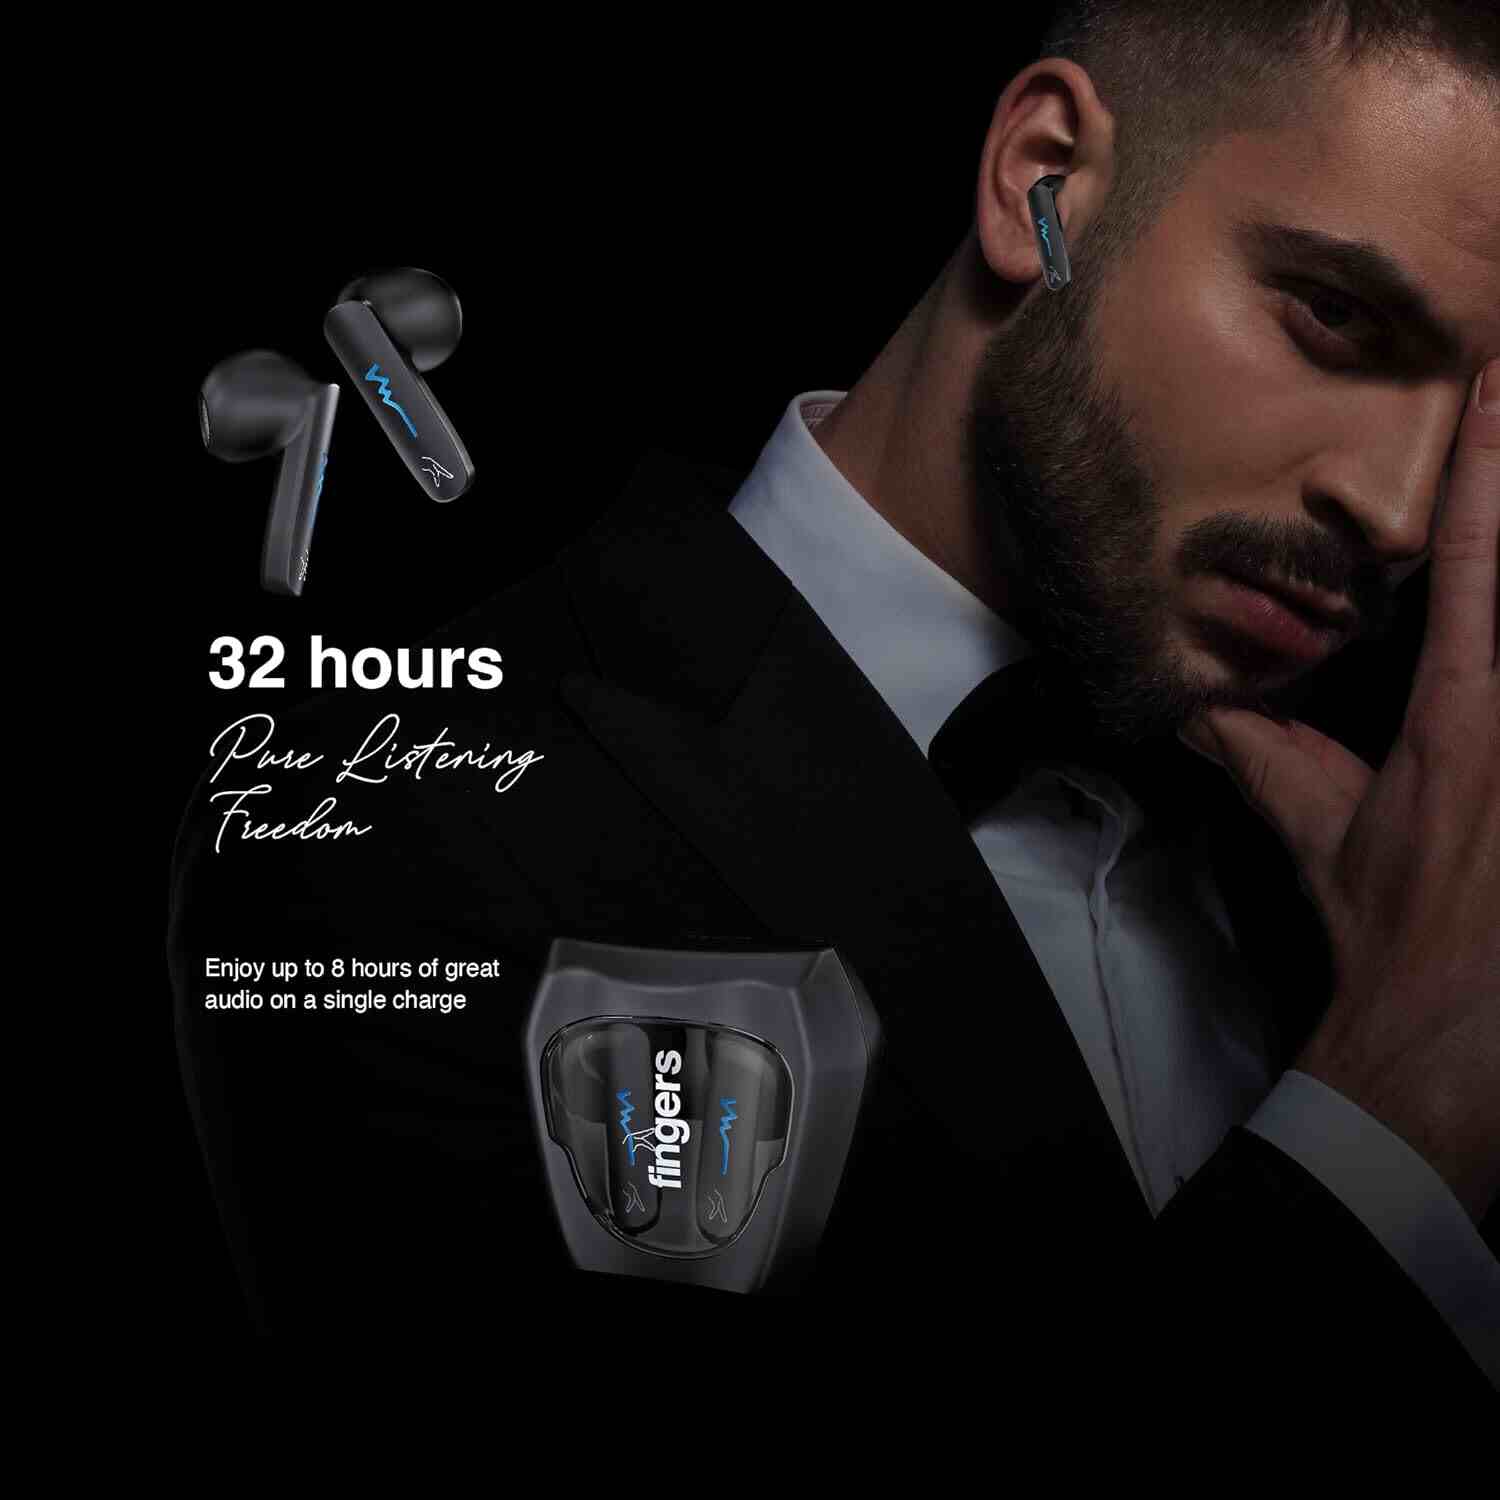 FINGERS Tuxedo TWS Earbuds with 32-Hour Playtime, Fast Charging, 13mm Neodymium Drivers, Surround Noise Cancellation (SNC Technology) Built-in Mic, IPX4 Sweat Resistant, Voice Assistant (Luxe Black)